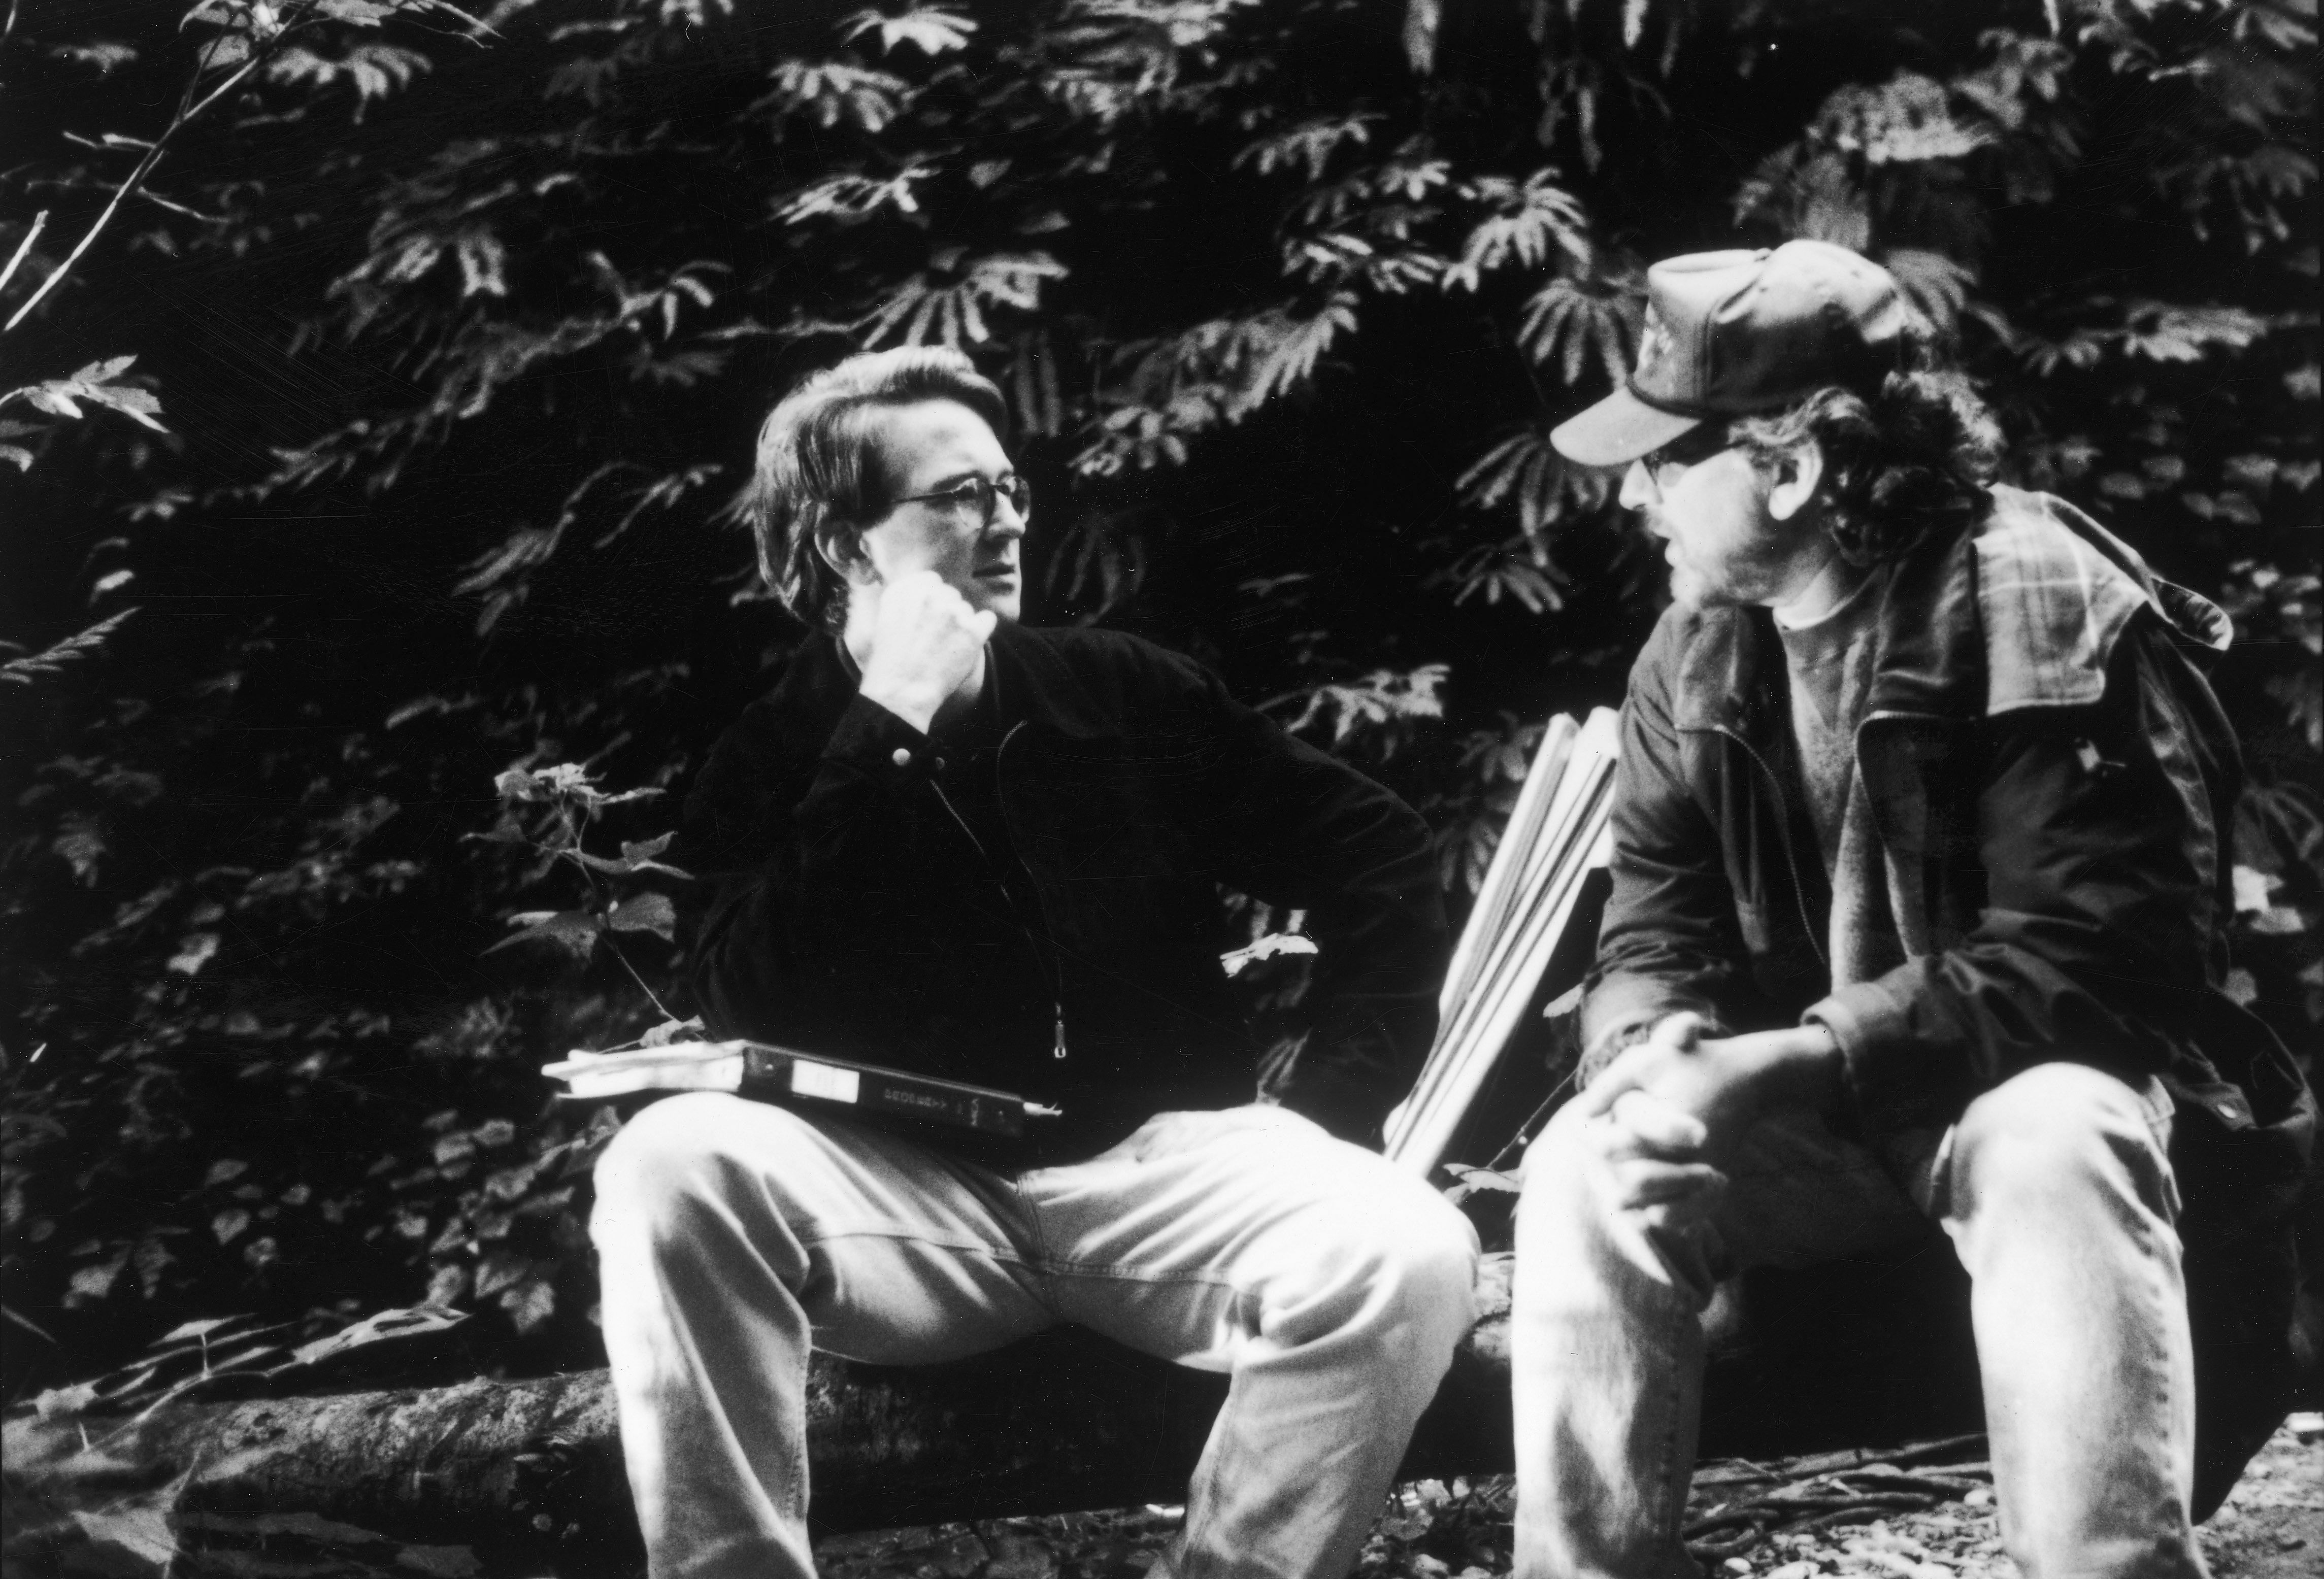 Steven Spielberg speaks with assistant director David Koepp (left) on the set of Spielberg’s film, ‘The Lost World: Jurassic Park,’ 1997.